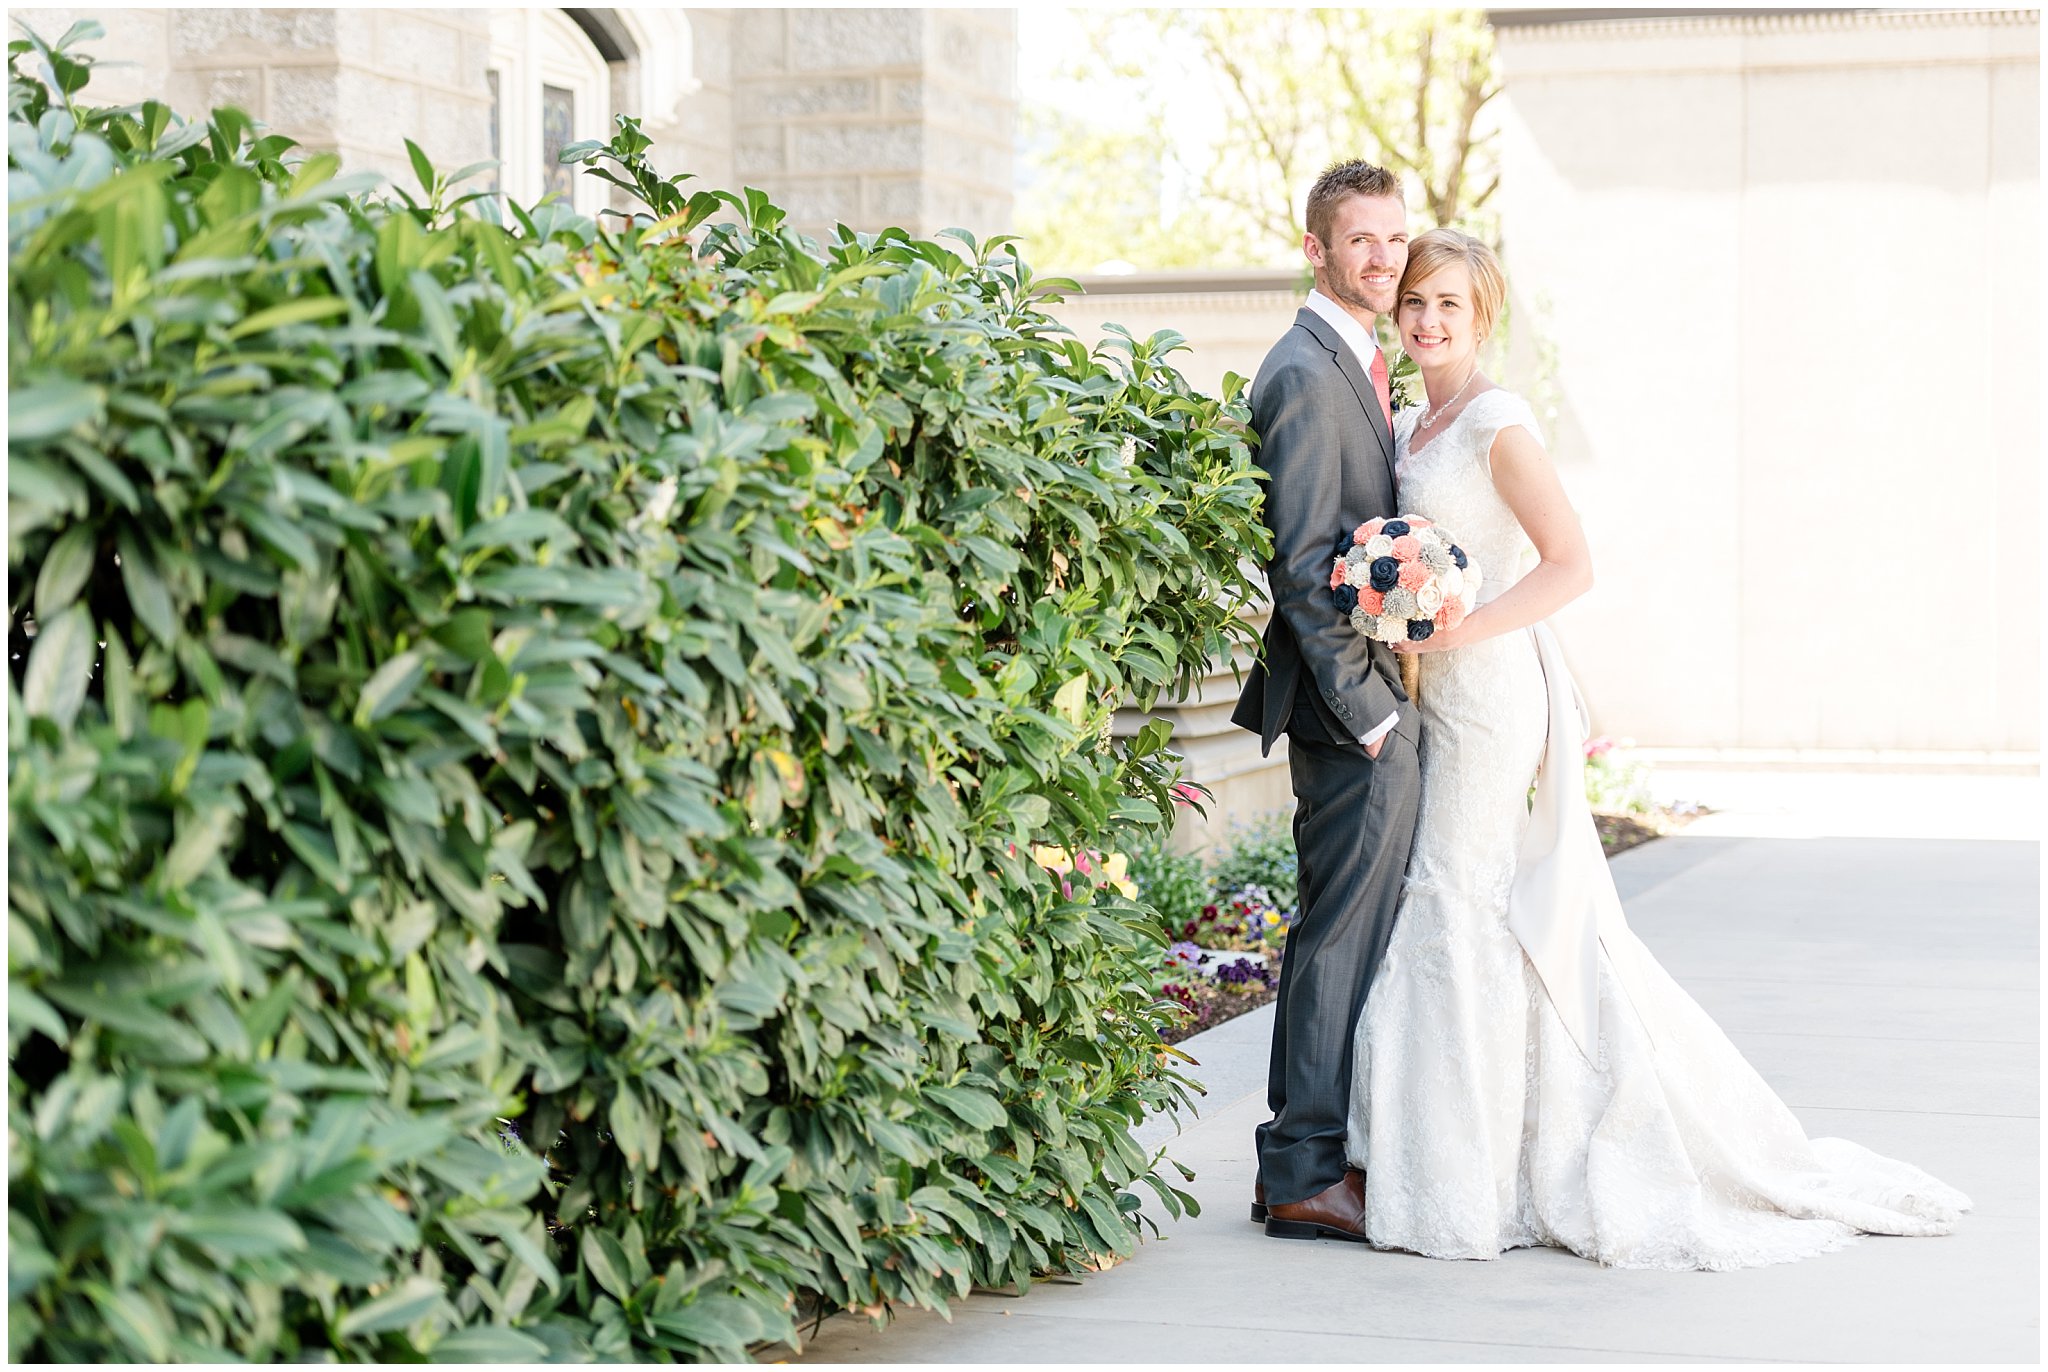 Salt Lake Temple spring wedding | Coral and grey wedding | Bride and groom pictures at the temple